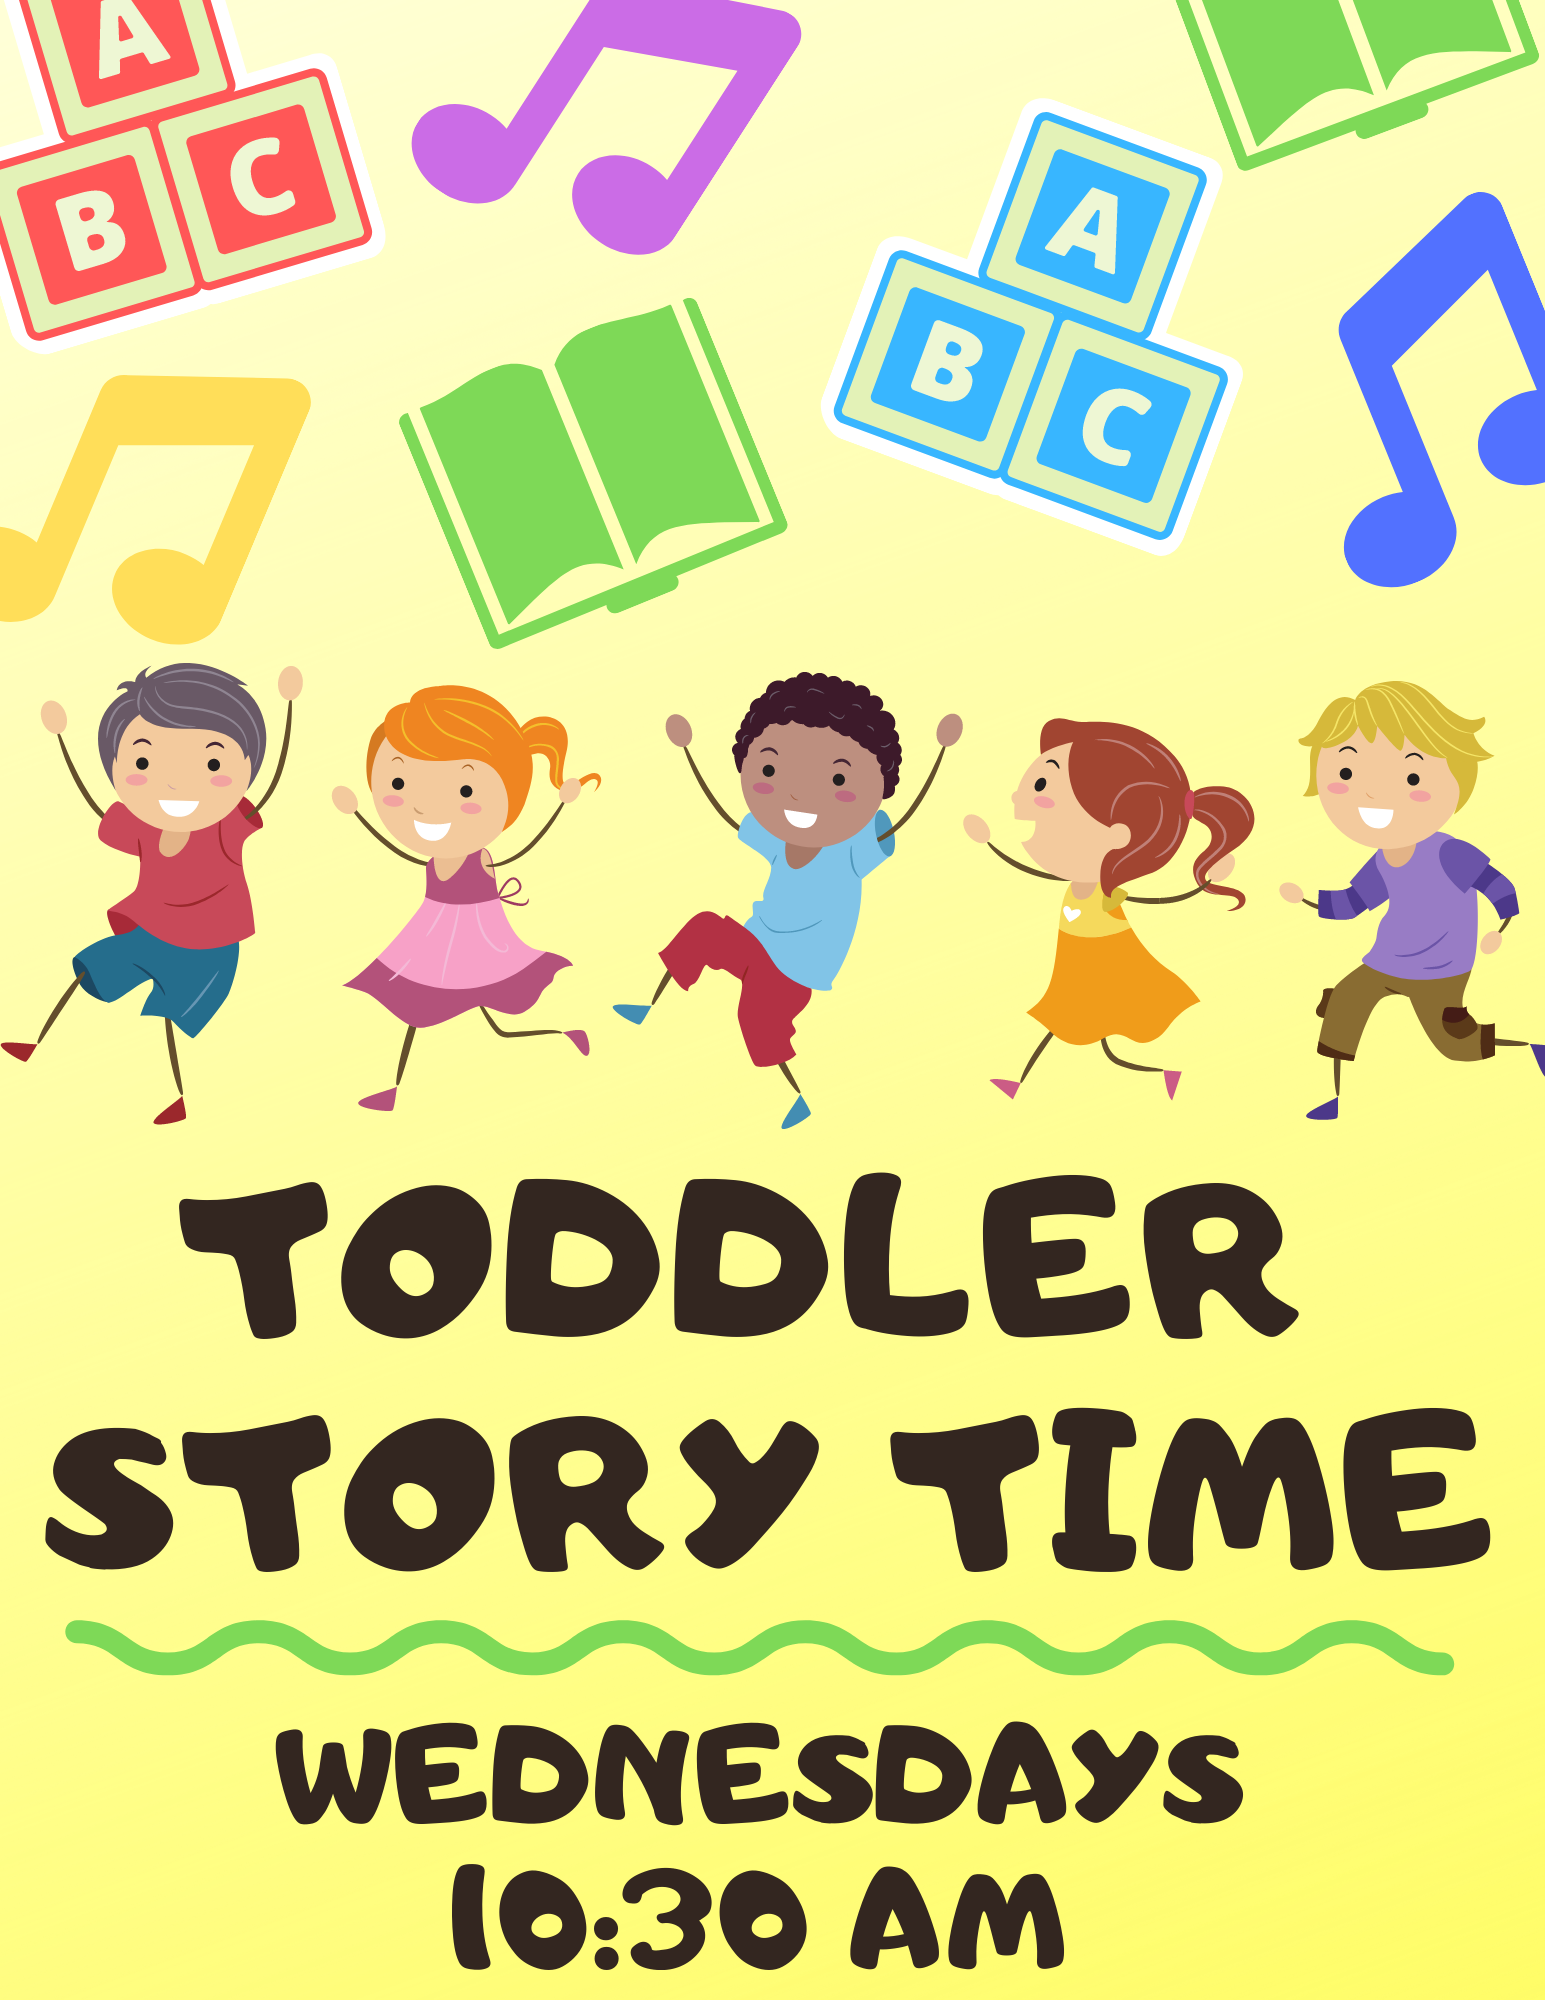 text reads: Toddler Story Time Wednesdays 10:30 AM